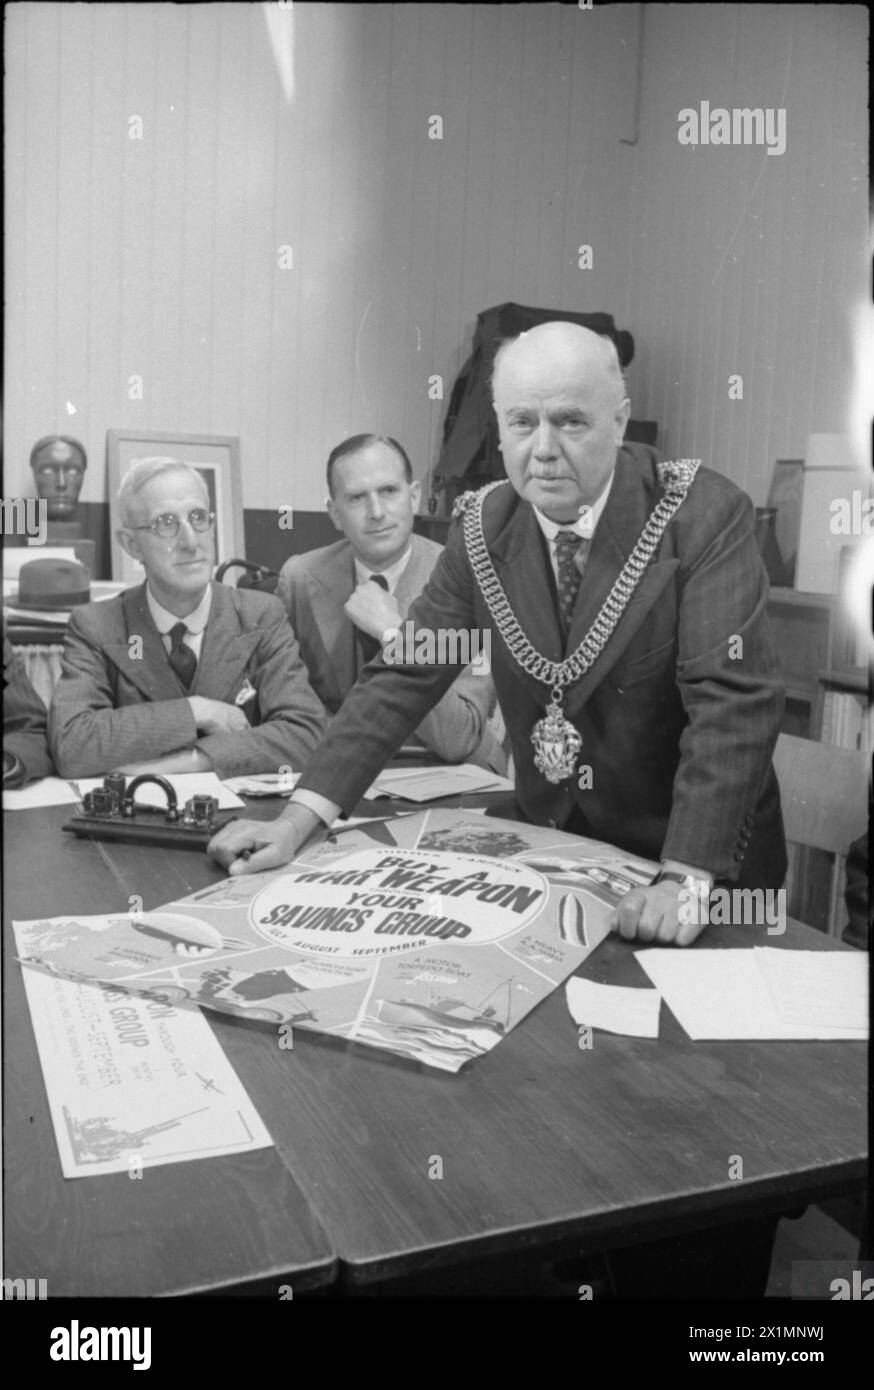 THE NATIONAL SAVINGS SCHEME AT WORK IN CANTERBURY, ENGLAND, 1941 - At the Sydney Cooper School of Art, St Peter's Street, Canterbury, a meeting was held to discuss plans for Canterbury's National Savings Campaign. At this meeting, Canterbury's 'Brain's Trust' was chaired by His Worship Alderman Charles Lefevre OBE, seen here leaning on the table. Also in attendance were Sydney Steele, Headmaster of Blean School (pictured on the left) and F E Clarke (centre), a local bank manager and Honorary Secretary of the Savings Committee. On the table, a large National Savings poster can be seen, Stock Photo